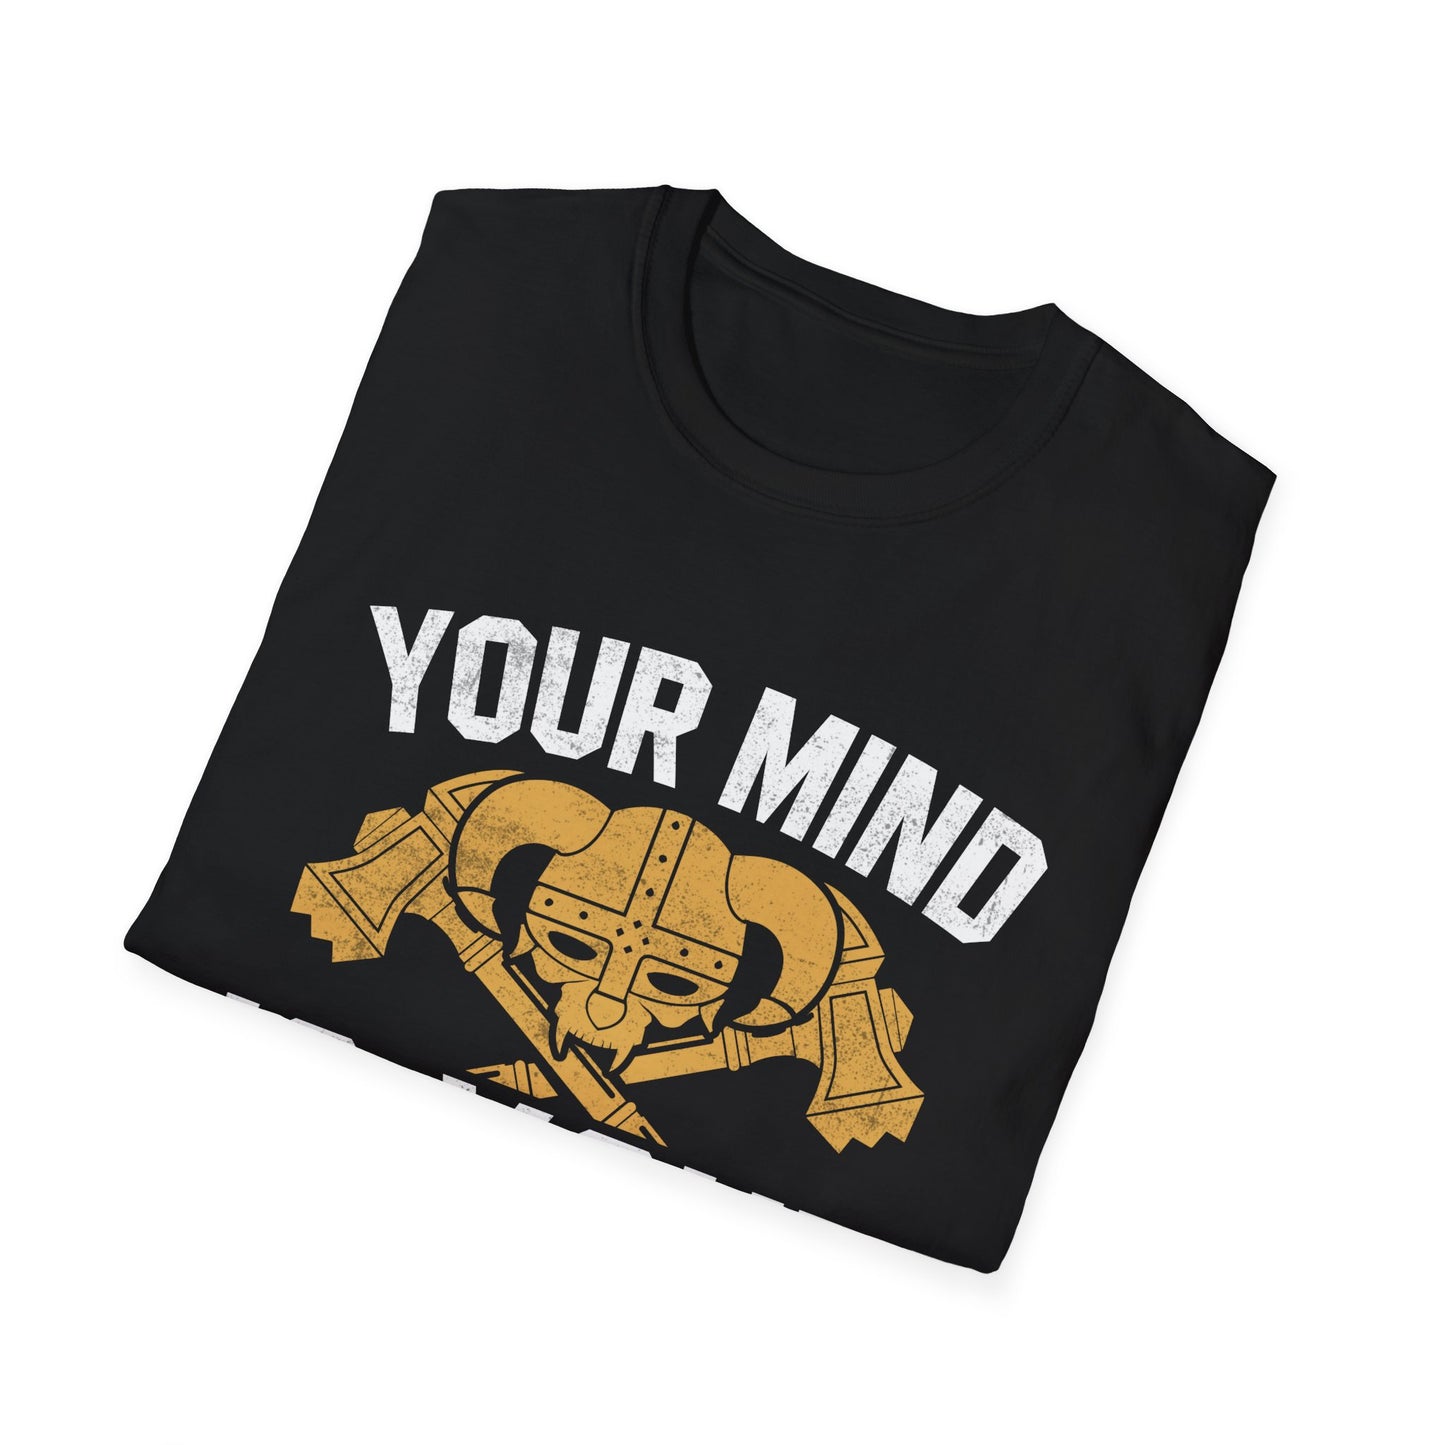 Your Mind Is Your Best Weapon T-Shirt